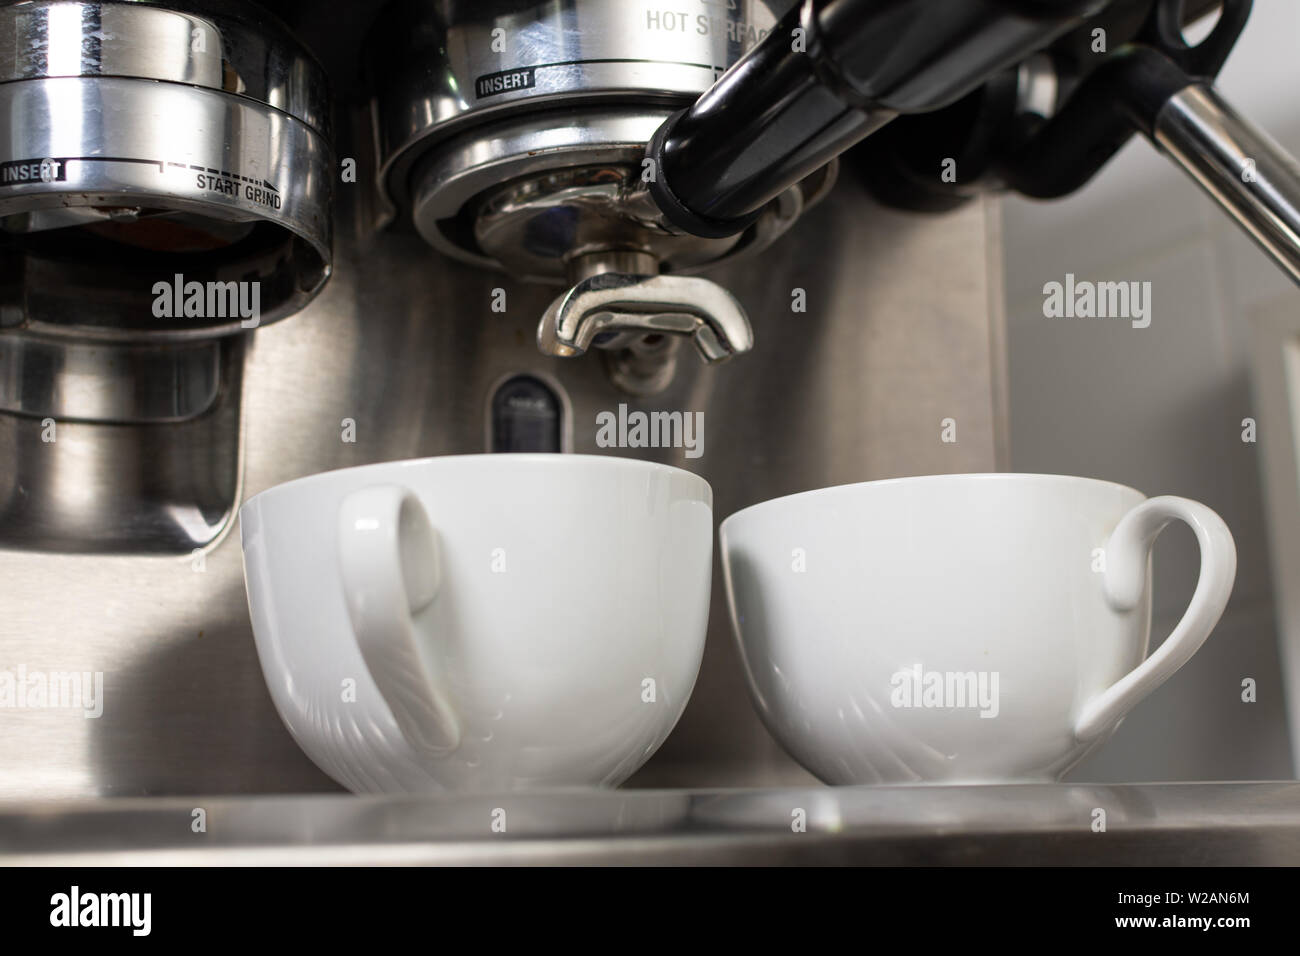 Coffee Machine Extracting Coffee into Two Cups Stock Photo